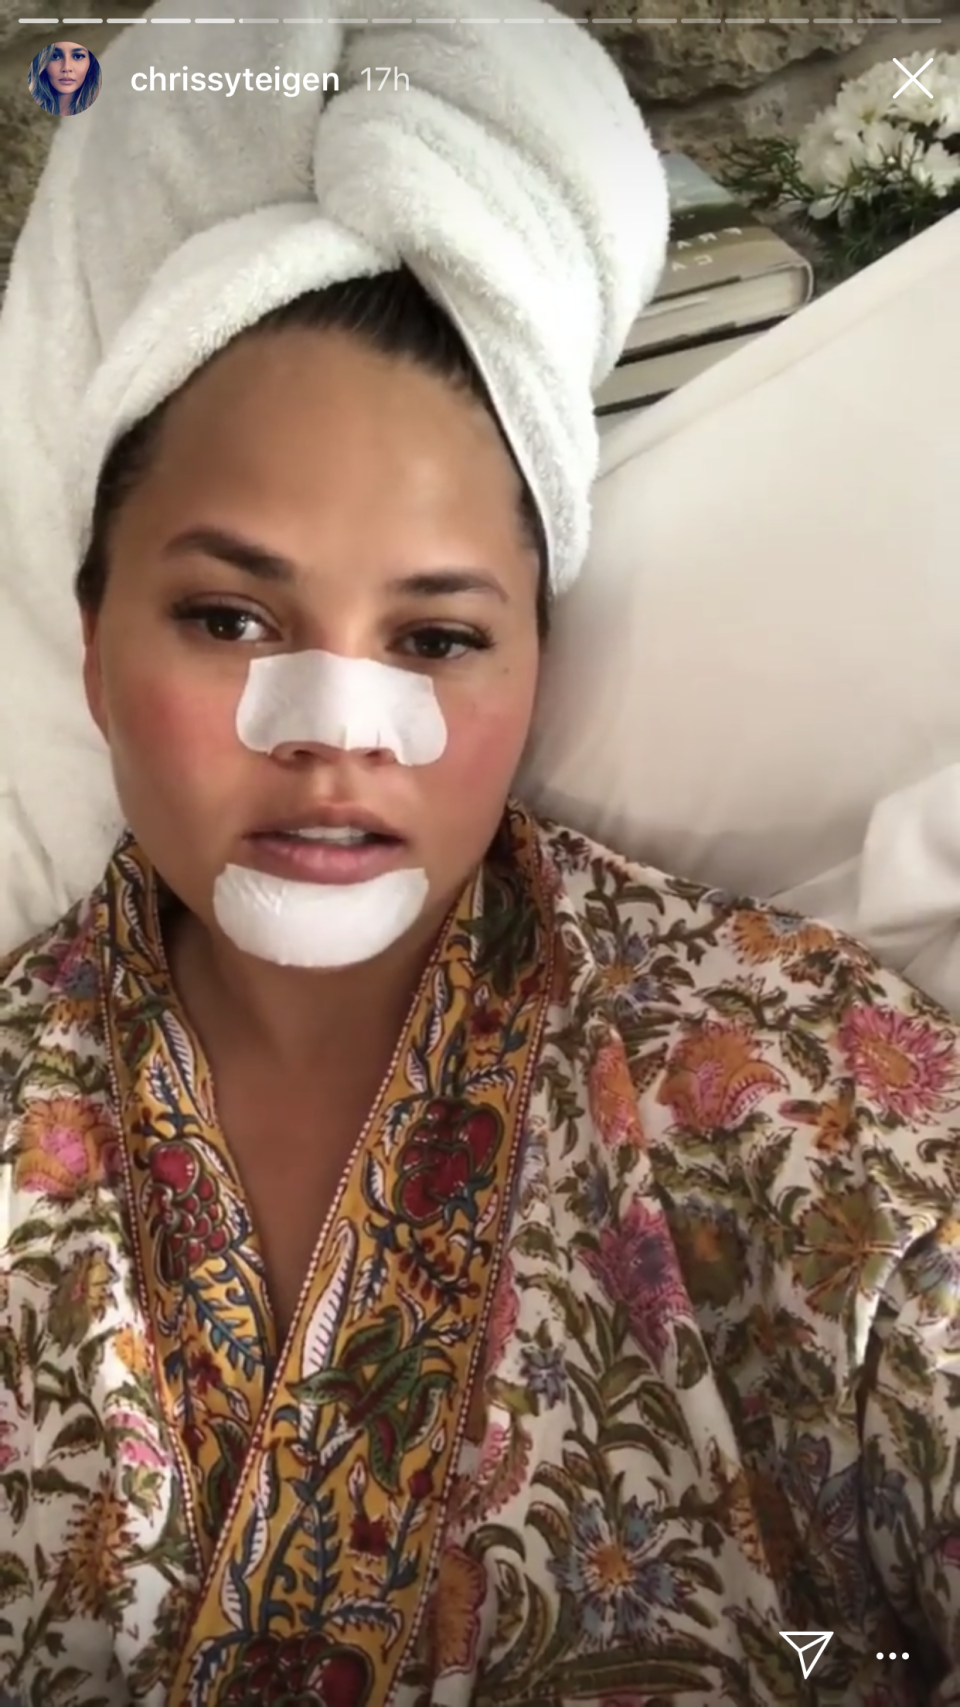 Chrissy Teigen relaxes in a bathrobe and towel turban while using Bioré Nose and Chin Strips. 